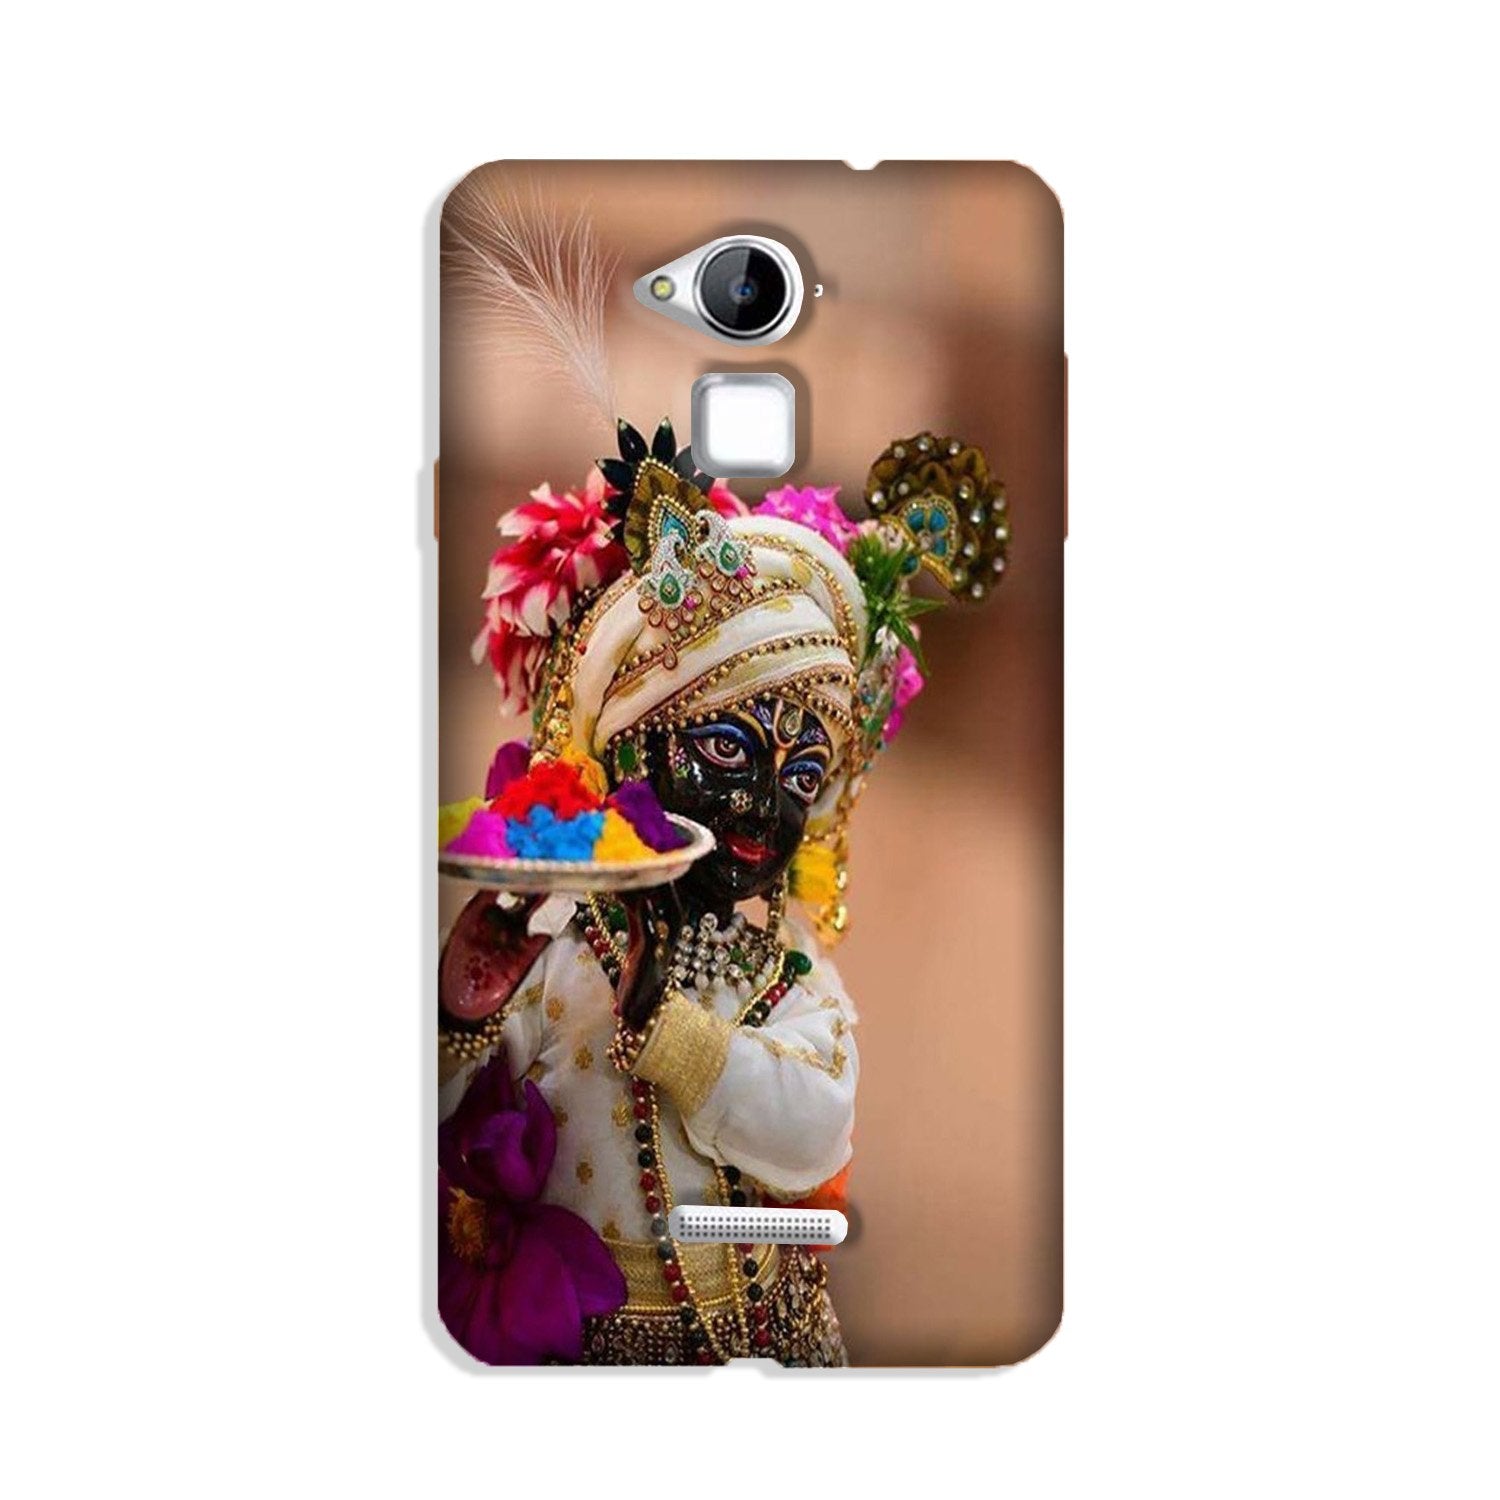 Lord Krishna2 Case for Coolpad Note 3